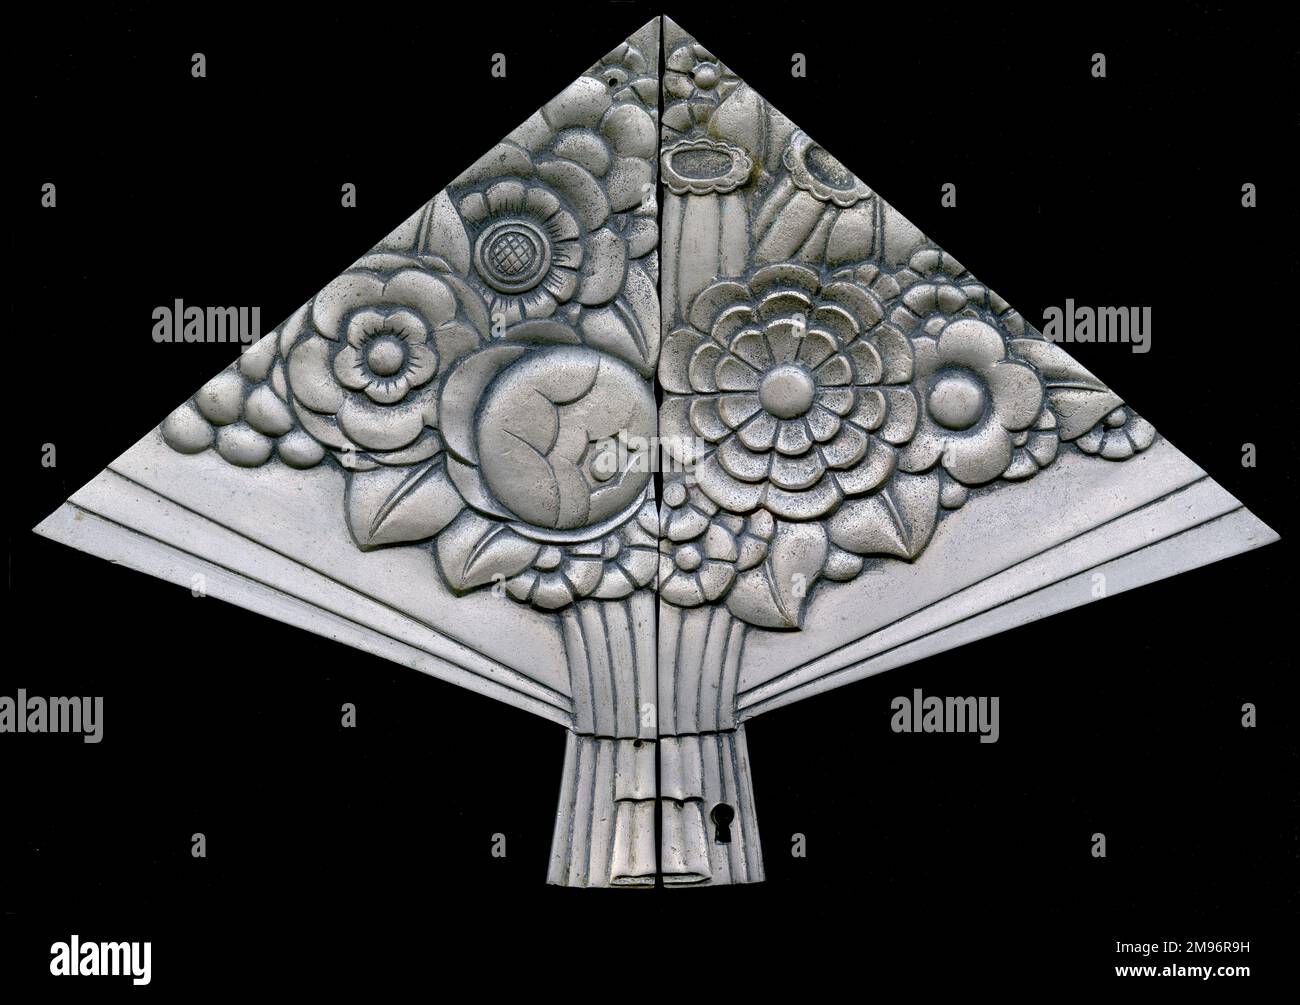 Decorative plated bronze in the shape of a bouquet of flowers, with a keyhole below. Stock Photo